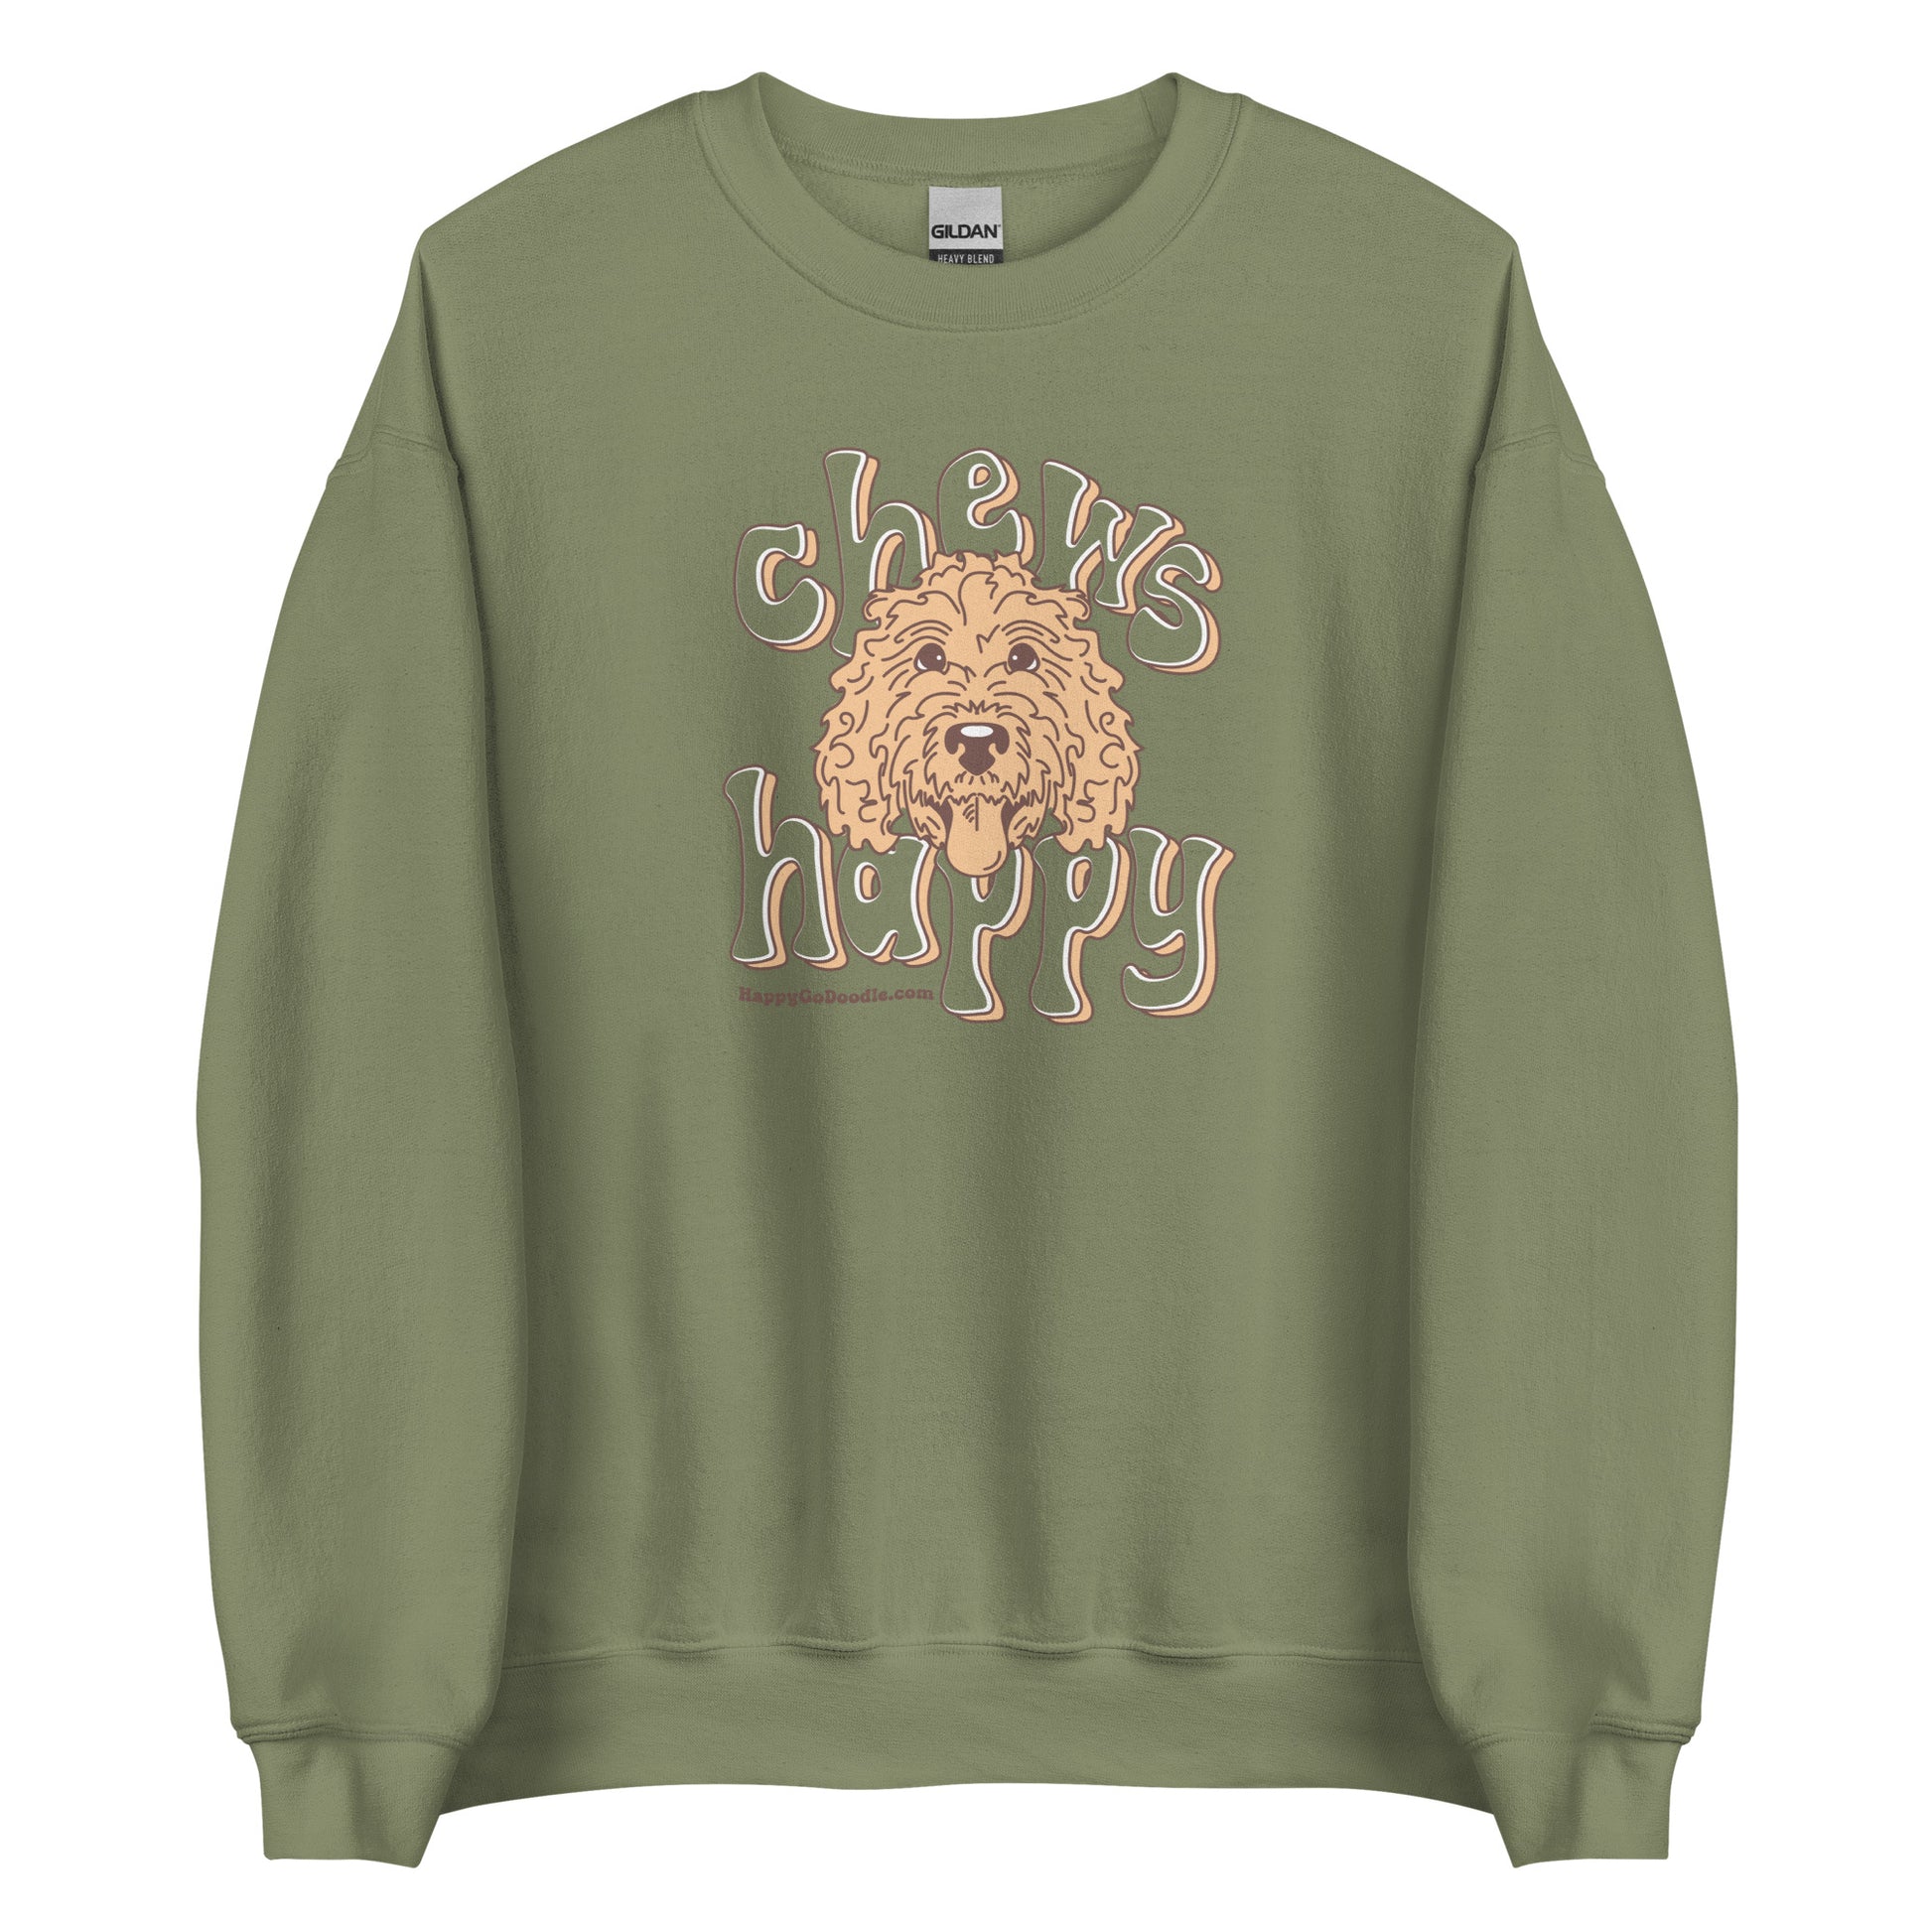 Goldendoodle crew neck sweatshirt with Goldendoodle face and words "Chews Happy" in military green color